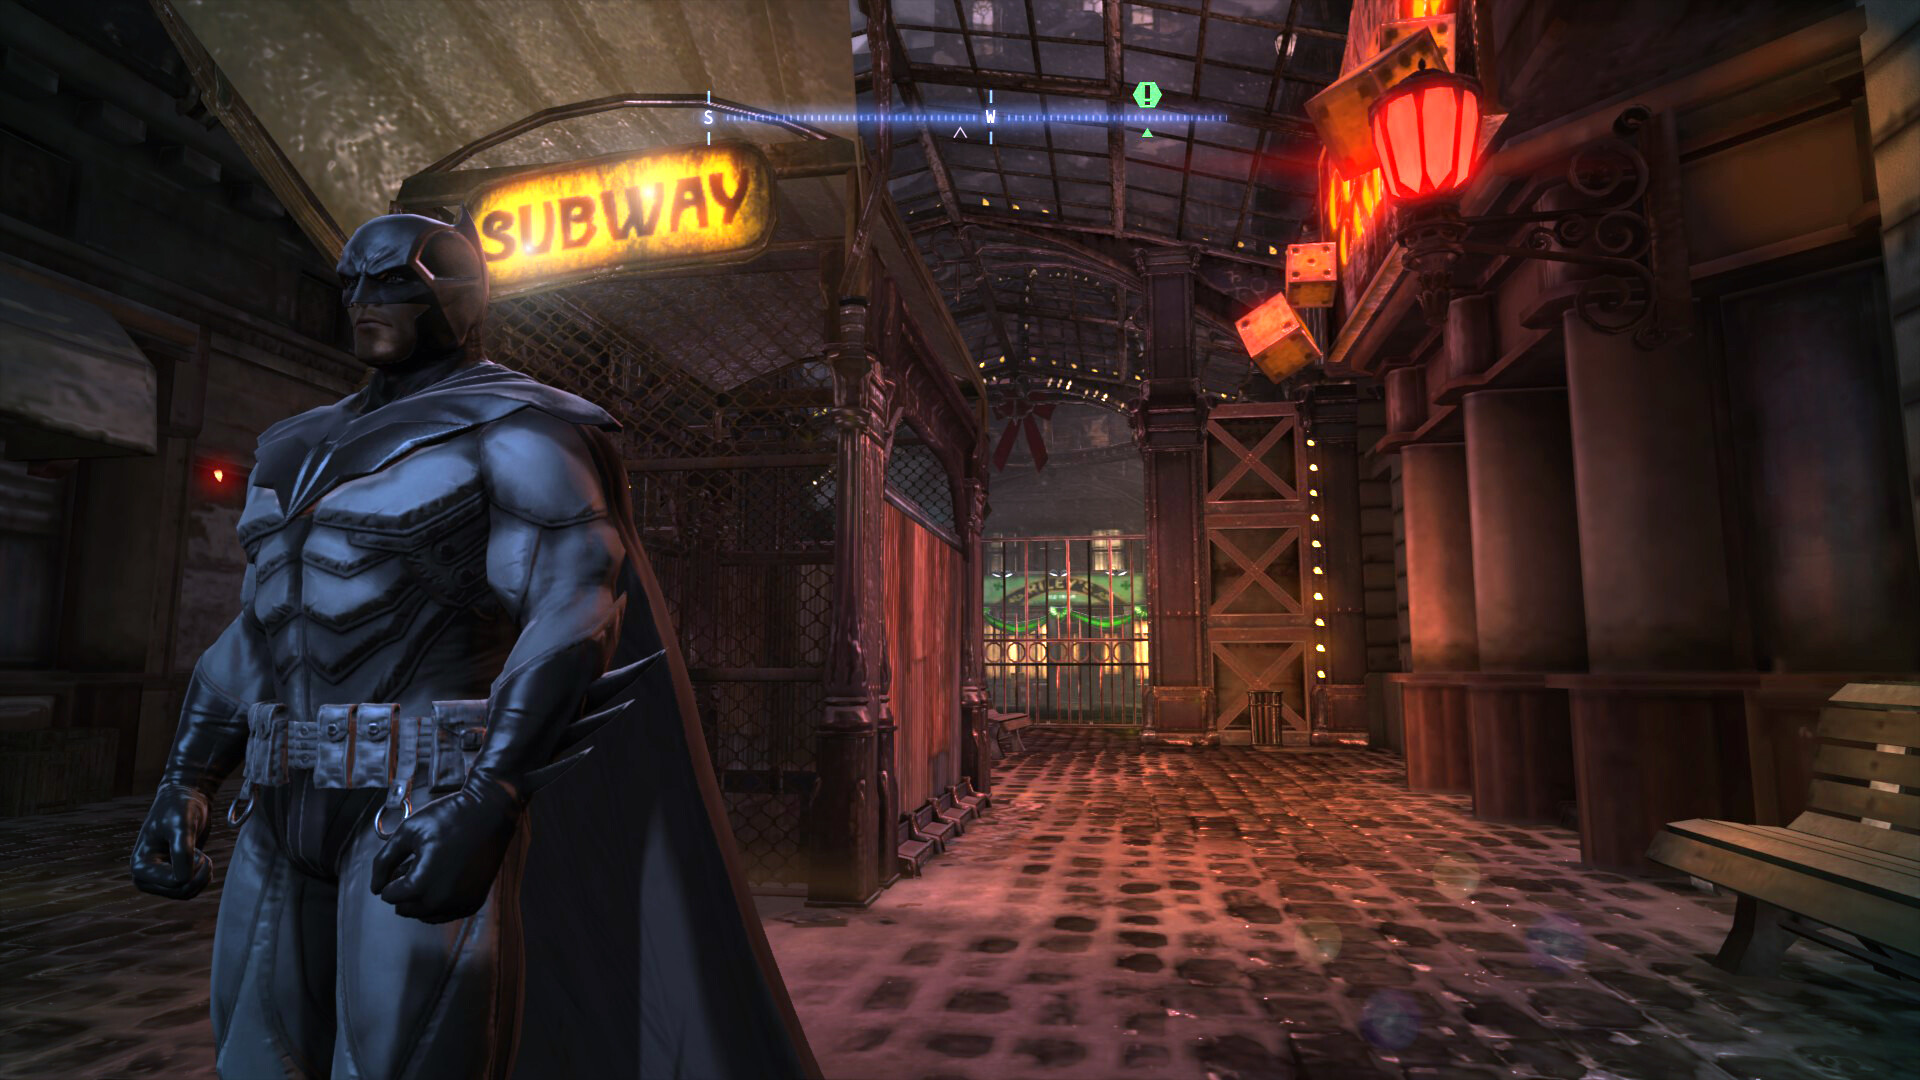 Arkham Origins Remaster on X: Here is 1 minute of the first level in Batman  Arkham Origins, now with remastered graphics. #Batman #Arkham #Origins #PC  #graphics #mod #PCGaming #Modding  / X